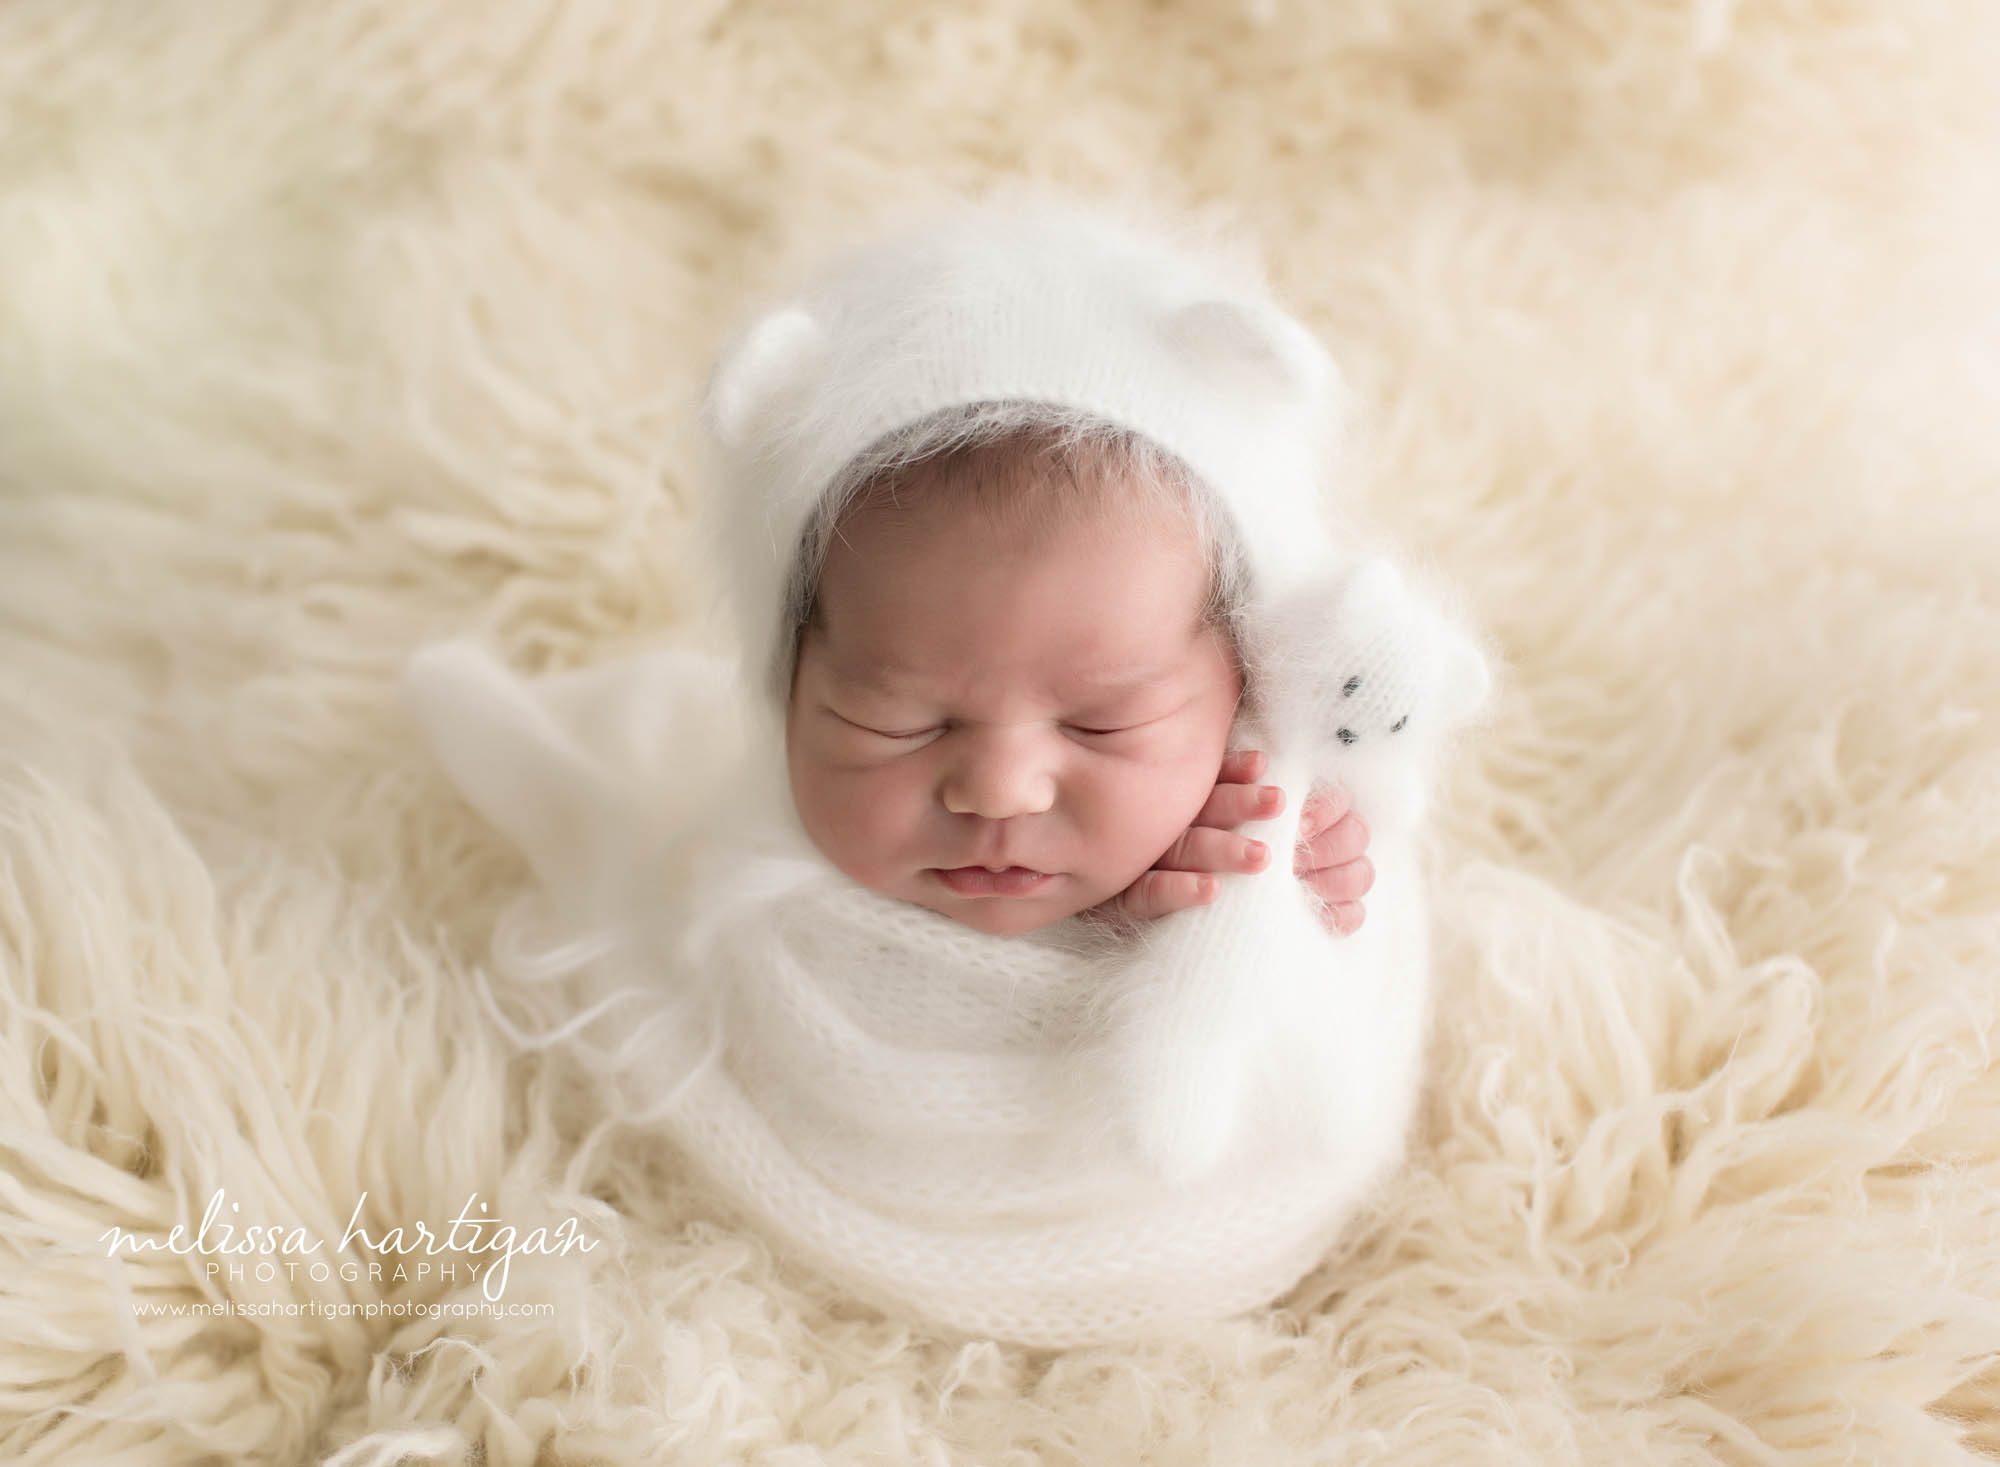 Melissa Hartigan Photography CT Newborn Photographer Emerson CT Newborn Session baby girl sleeping wrapped in white wrap with matching white knit hat with ears on white fluffy rug holding white knit bear